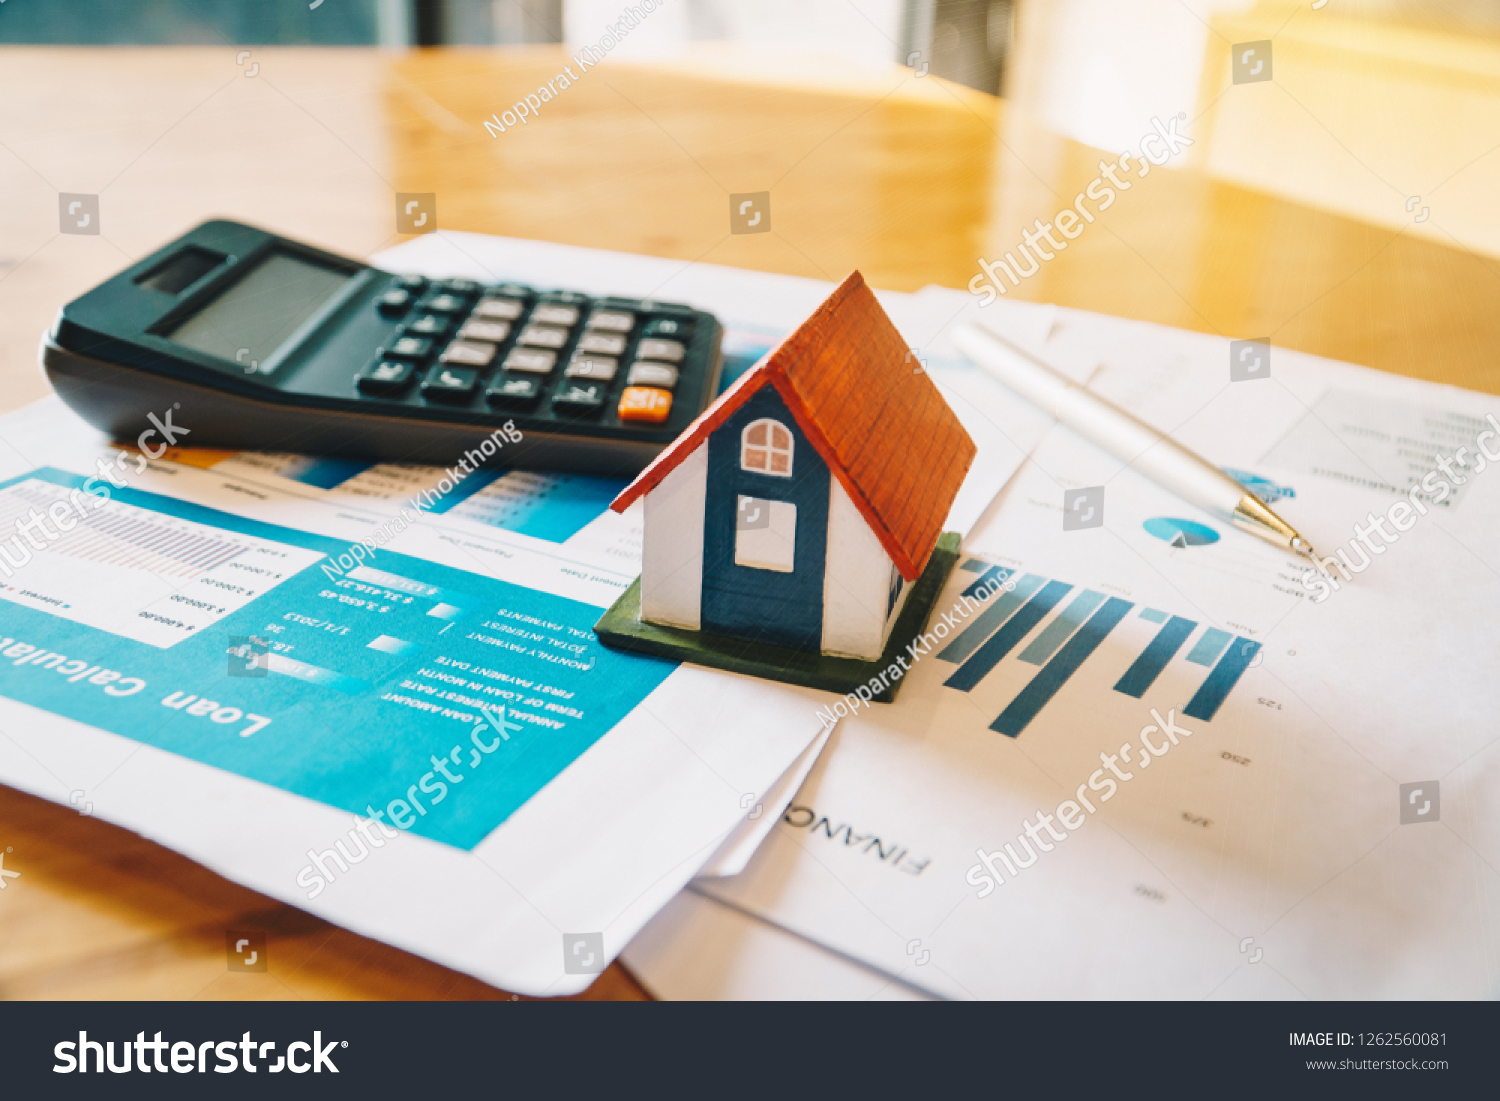 House model,Calculator and financial chart  on wooden table. Investment to buying property concept. #1262560081